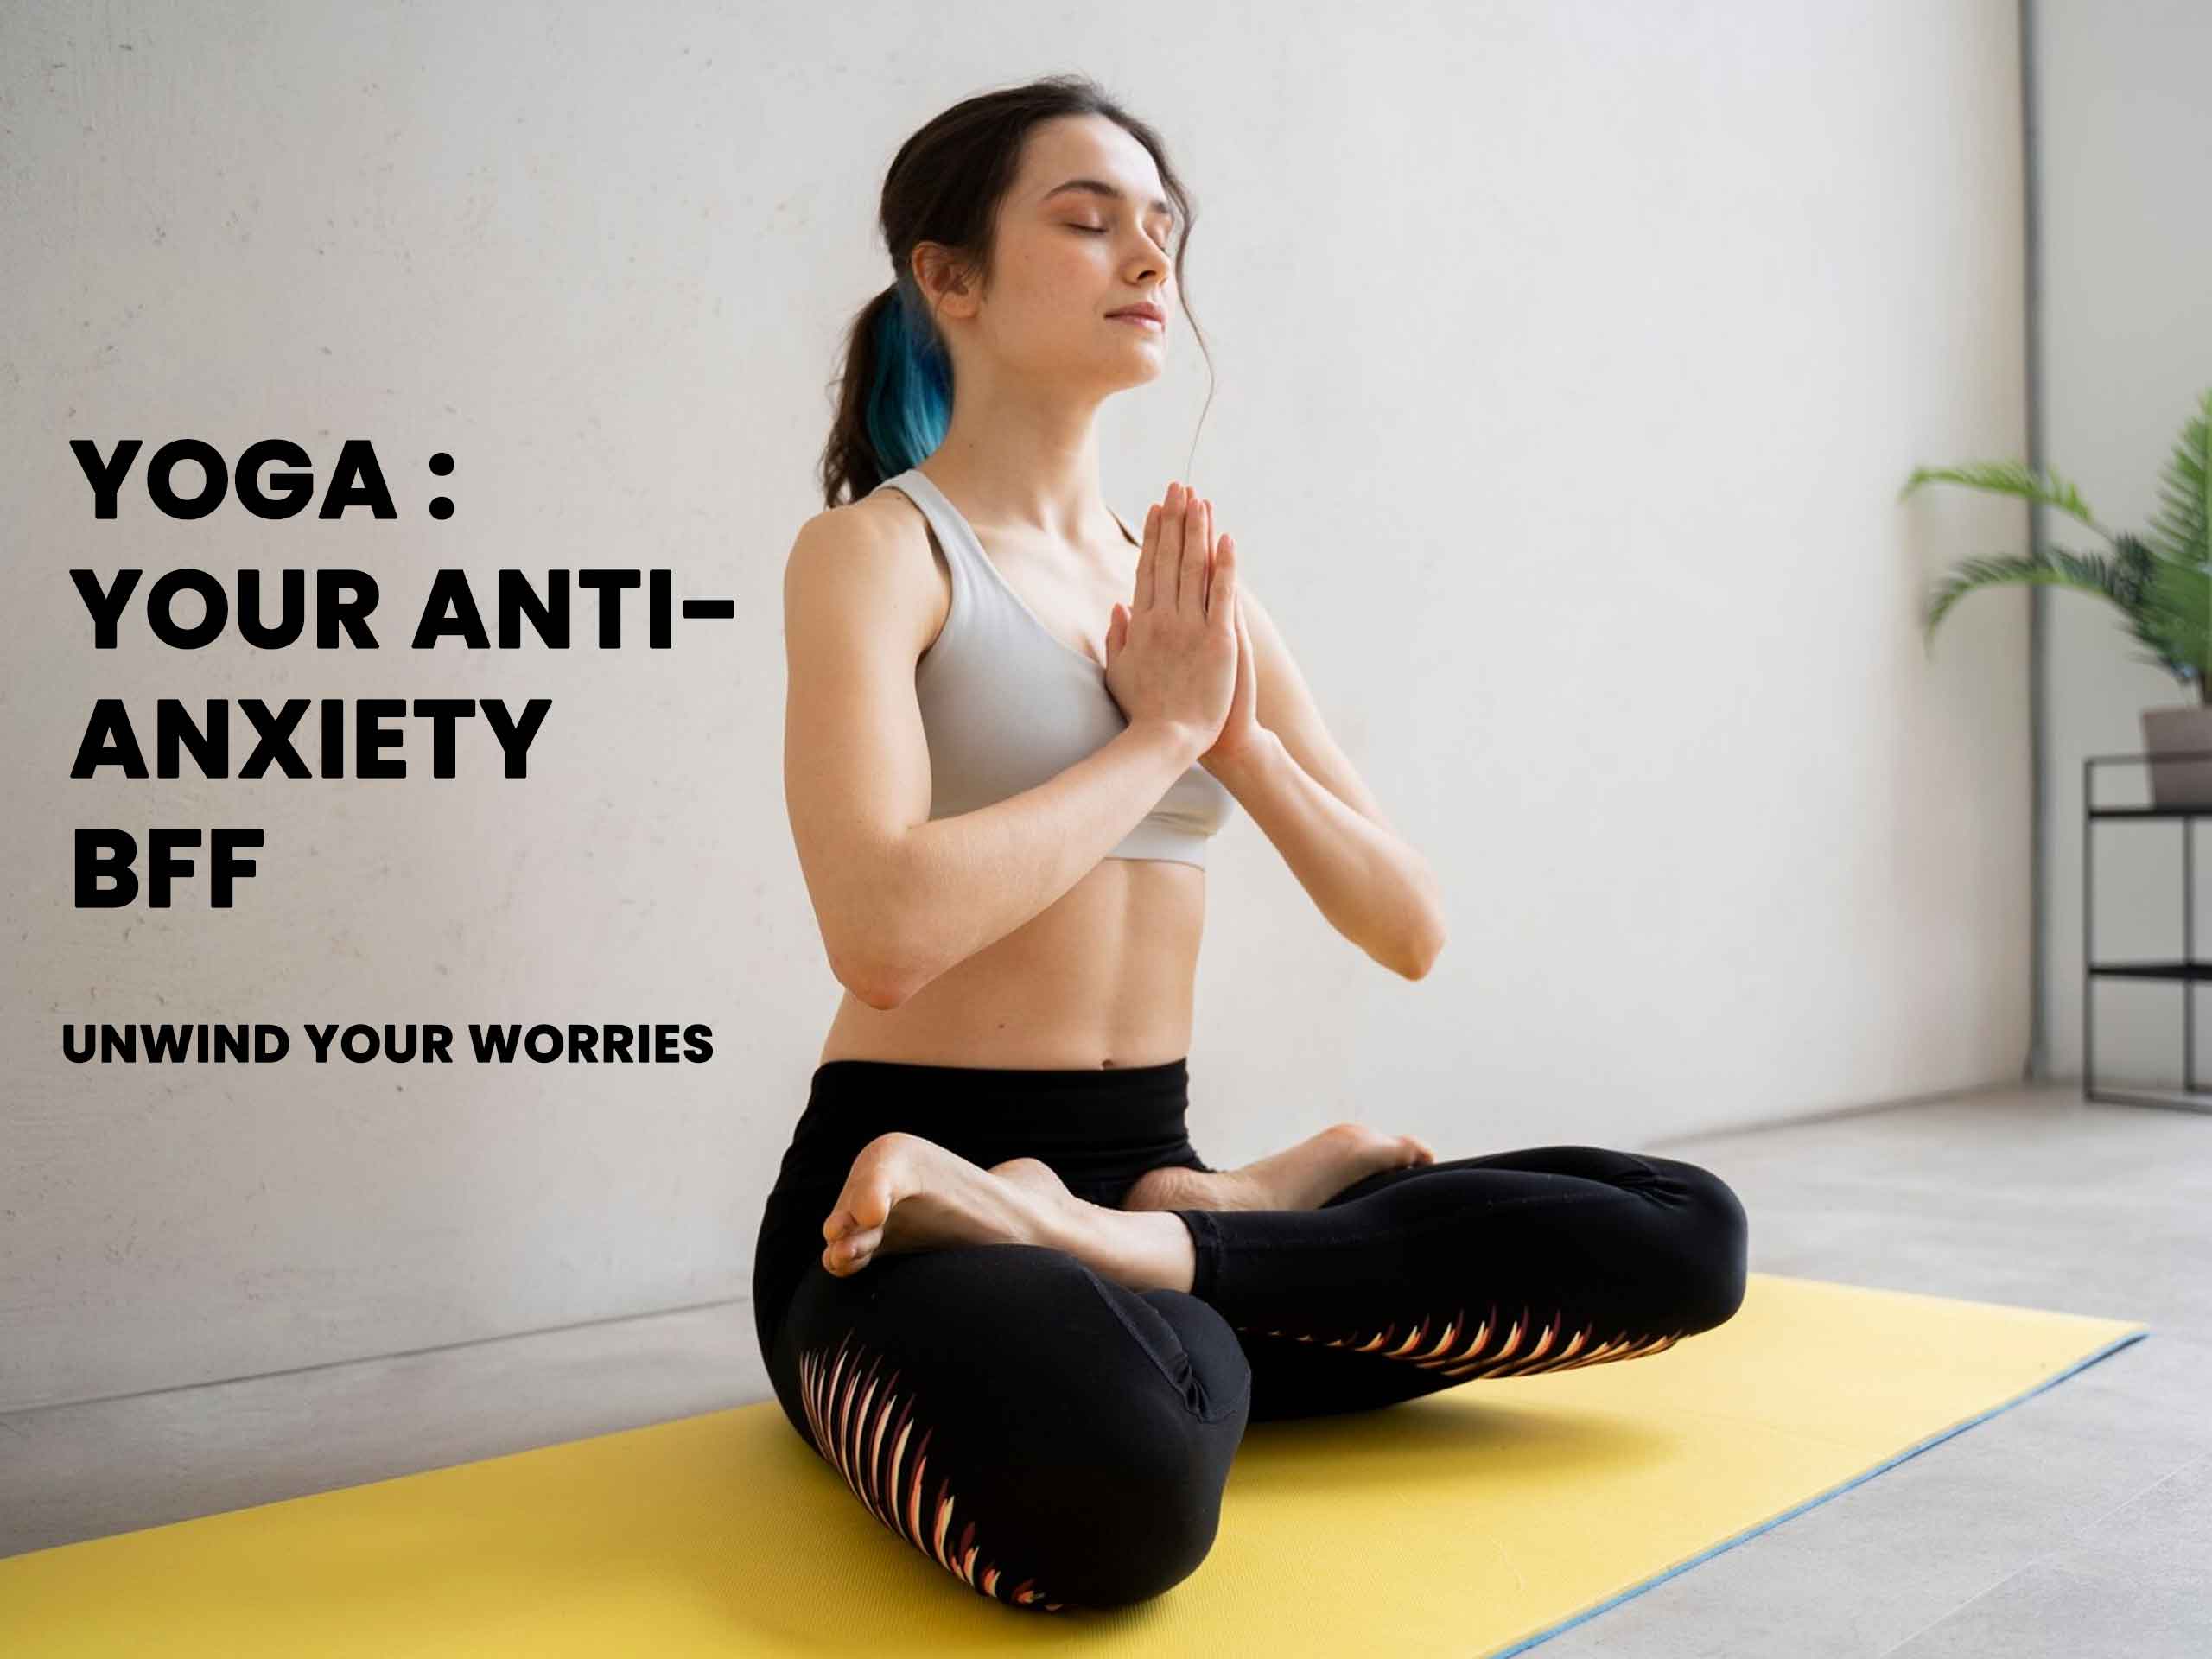 Unwind Your Worries: How Yoga Can Be Your Anti-Anxiety BFF